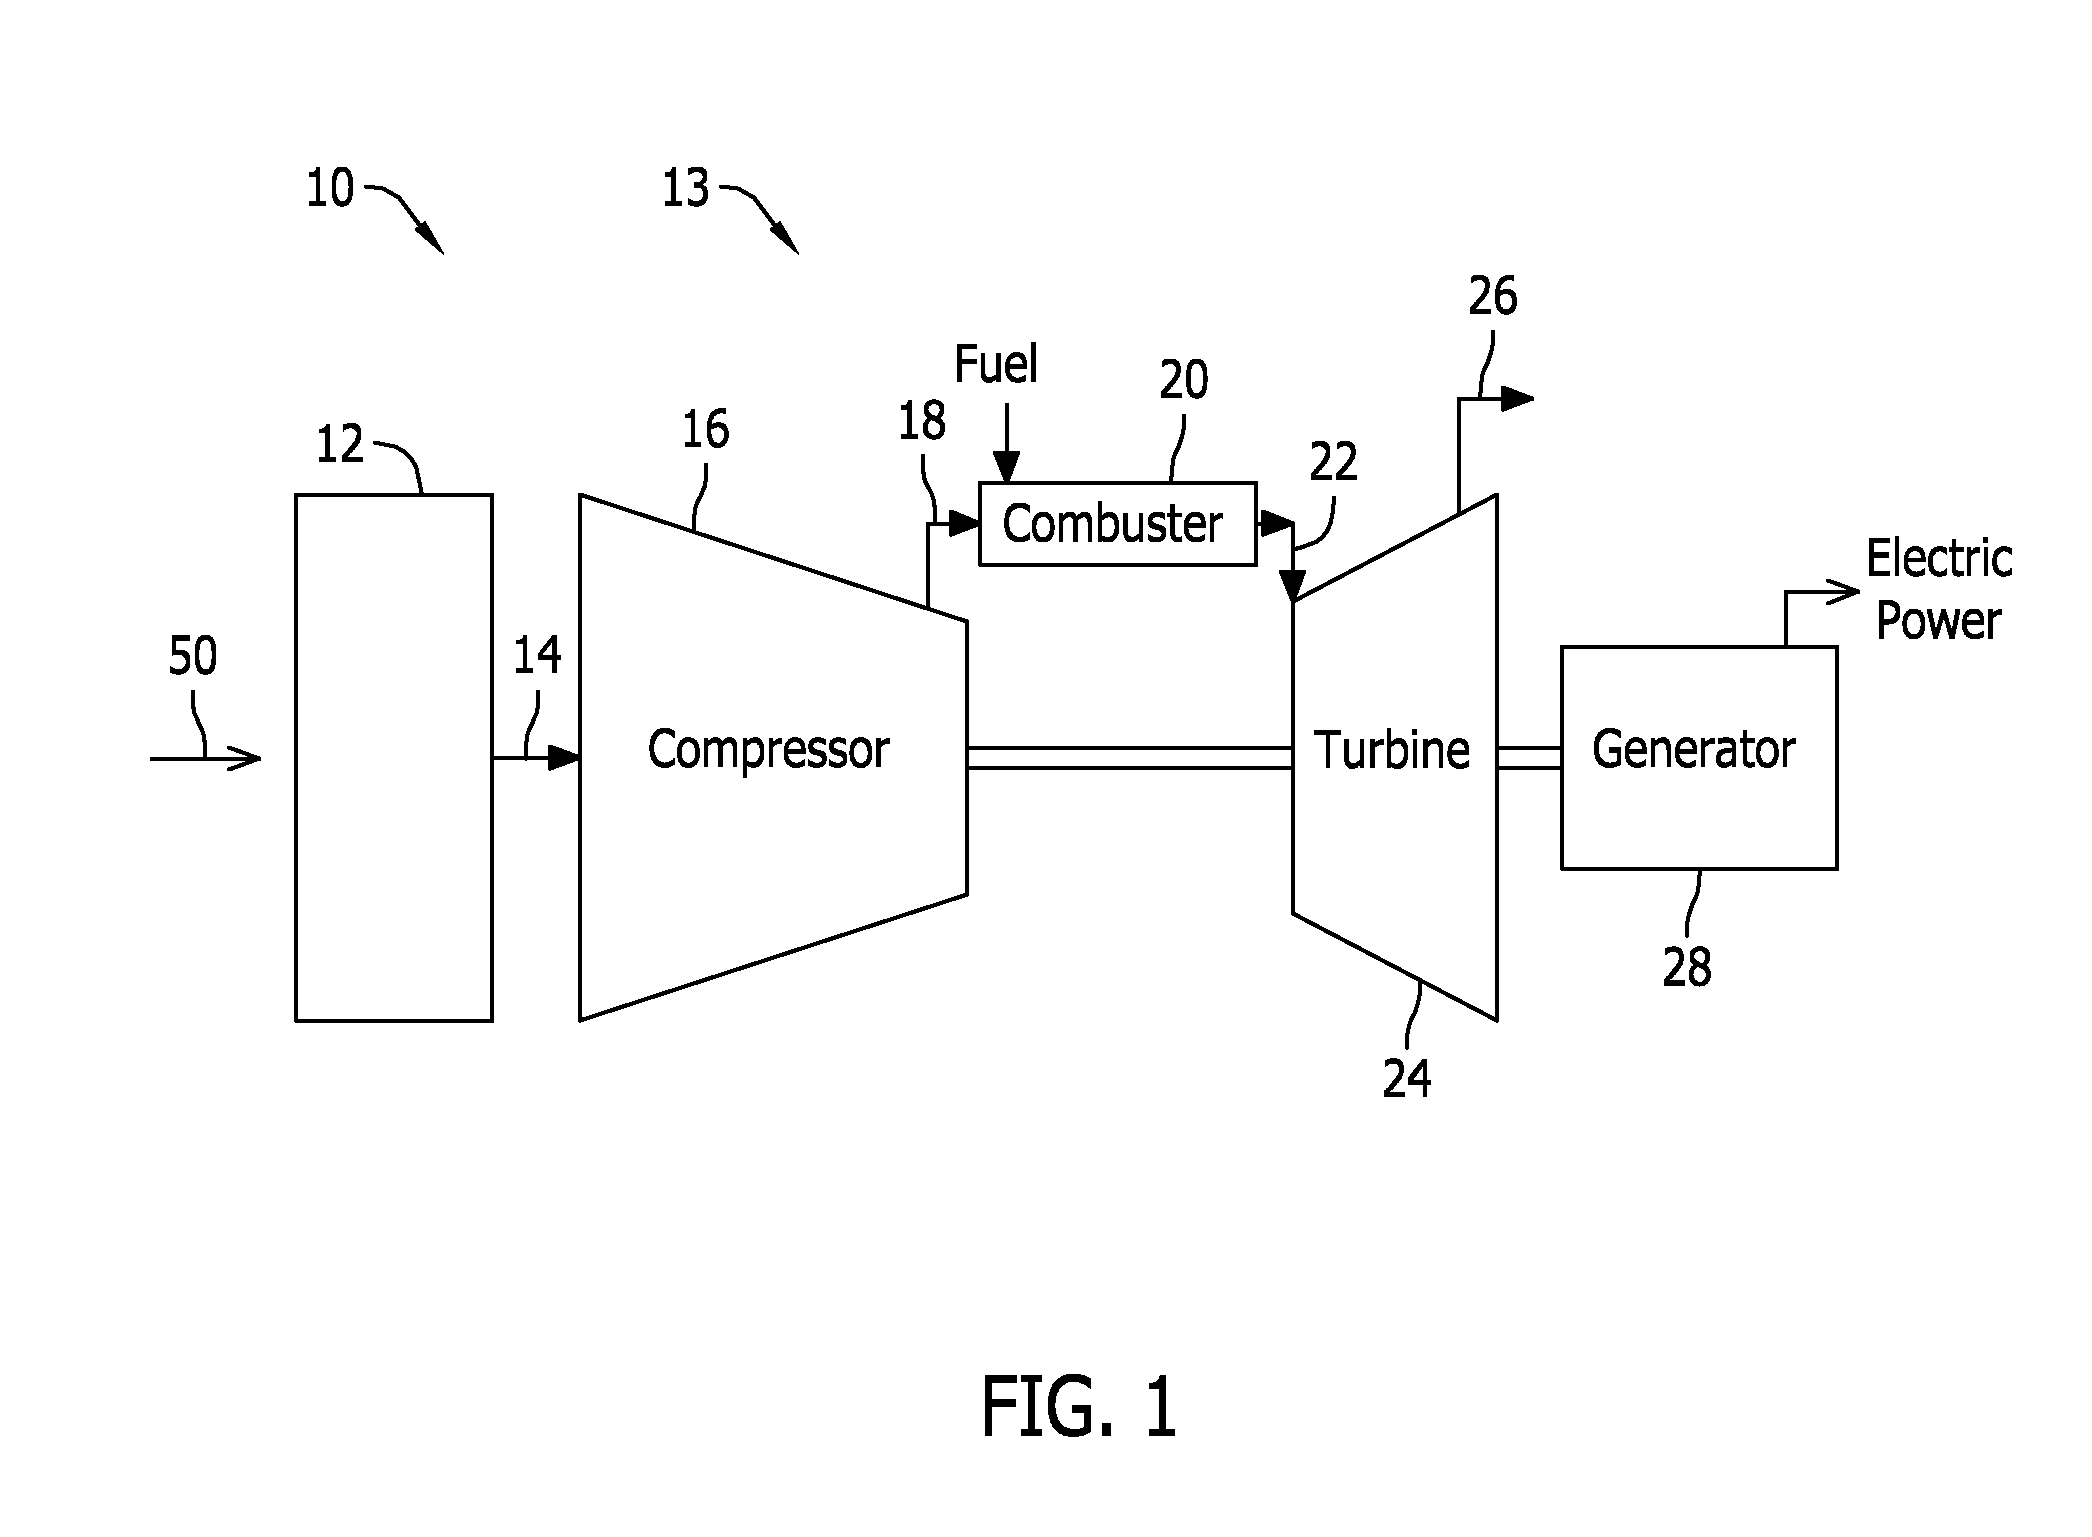 Fuel leak detection system for use in a turbine enclosure